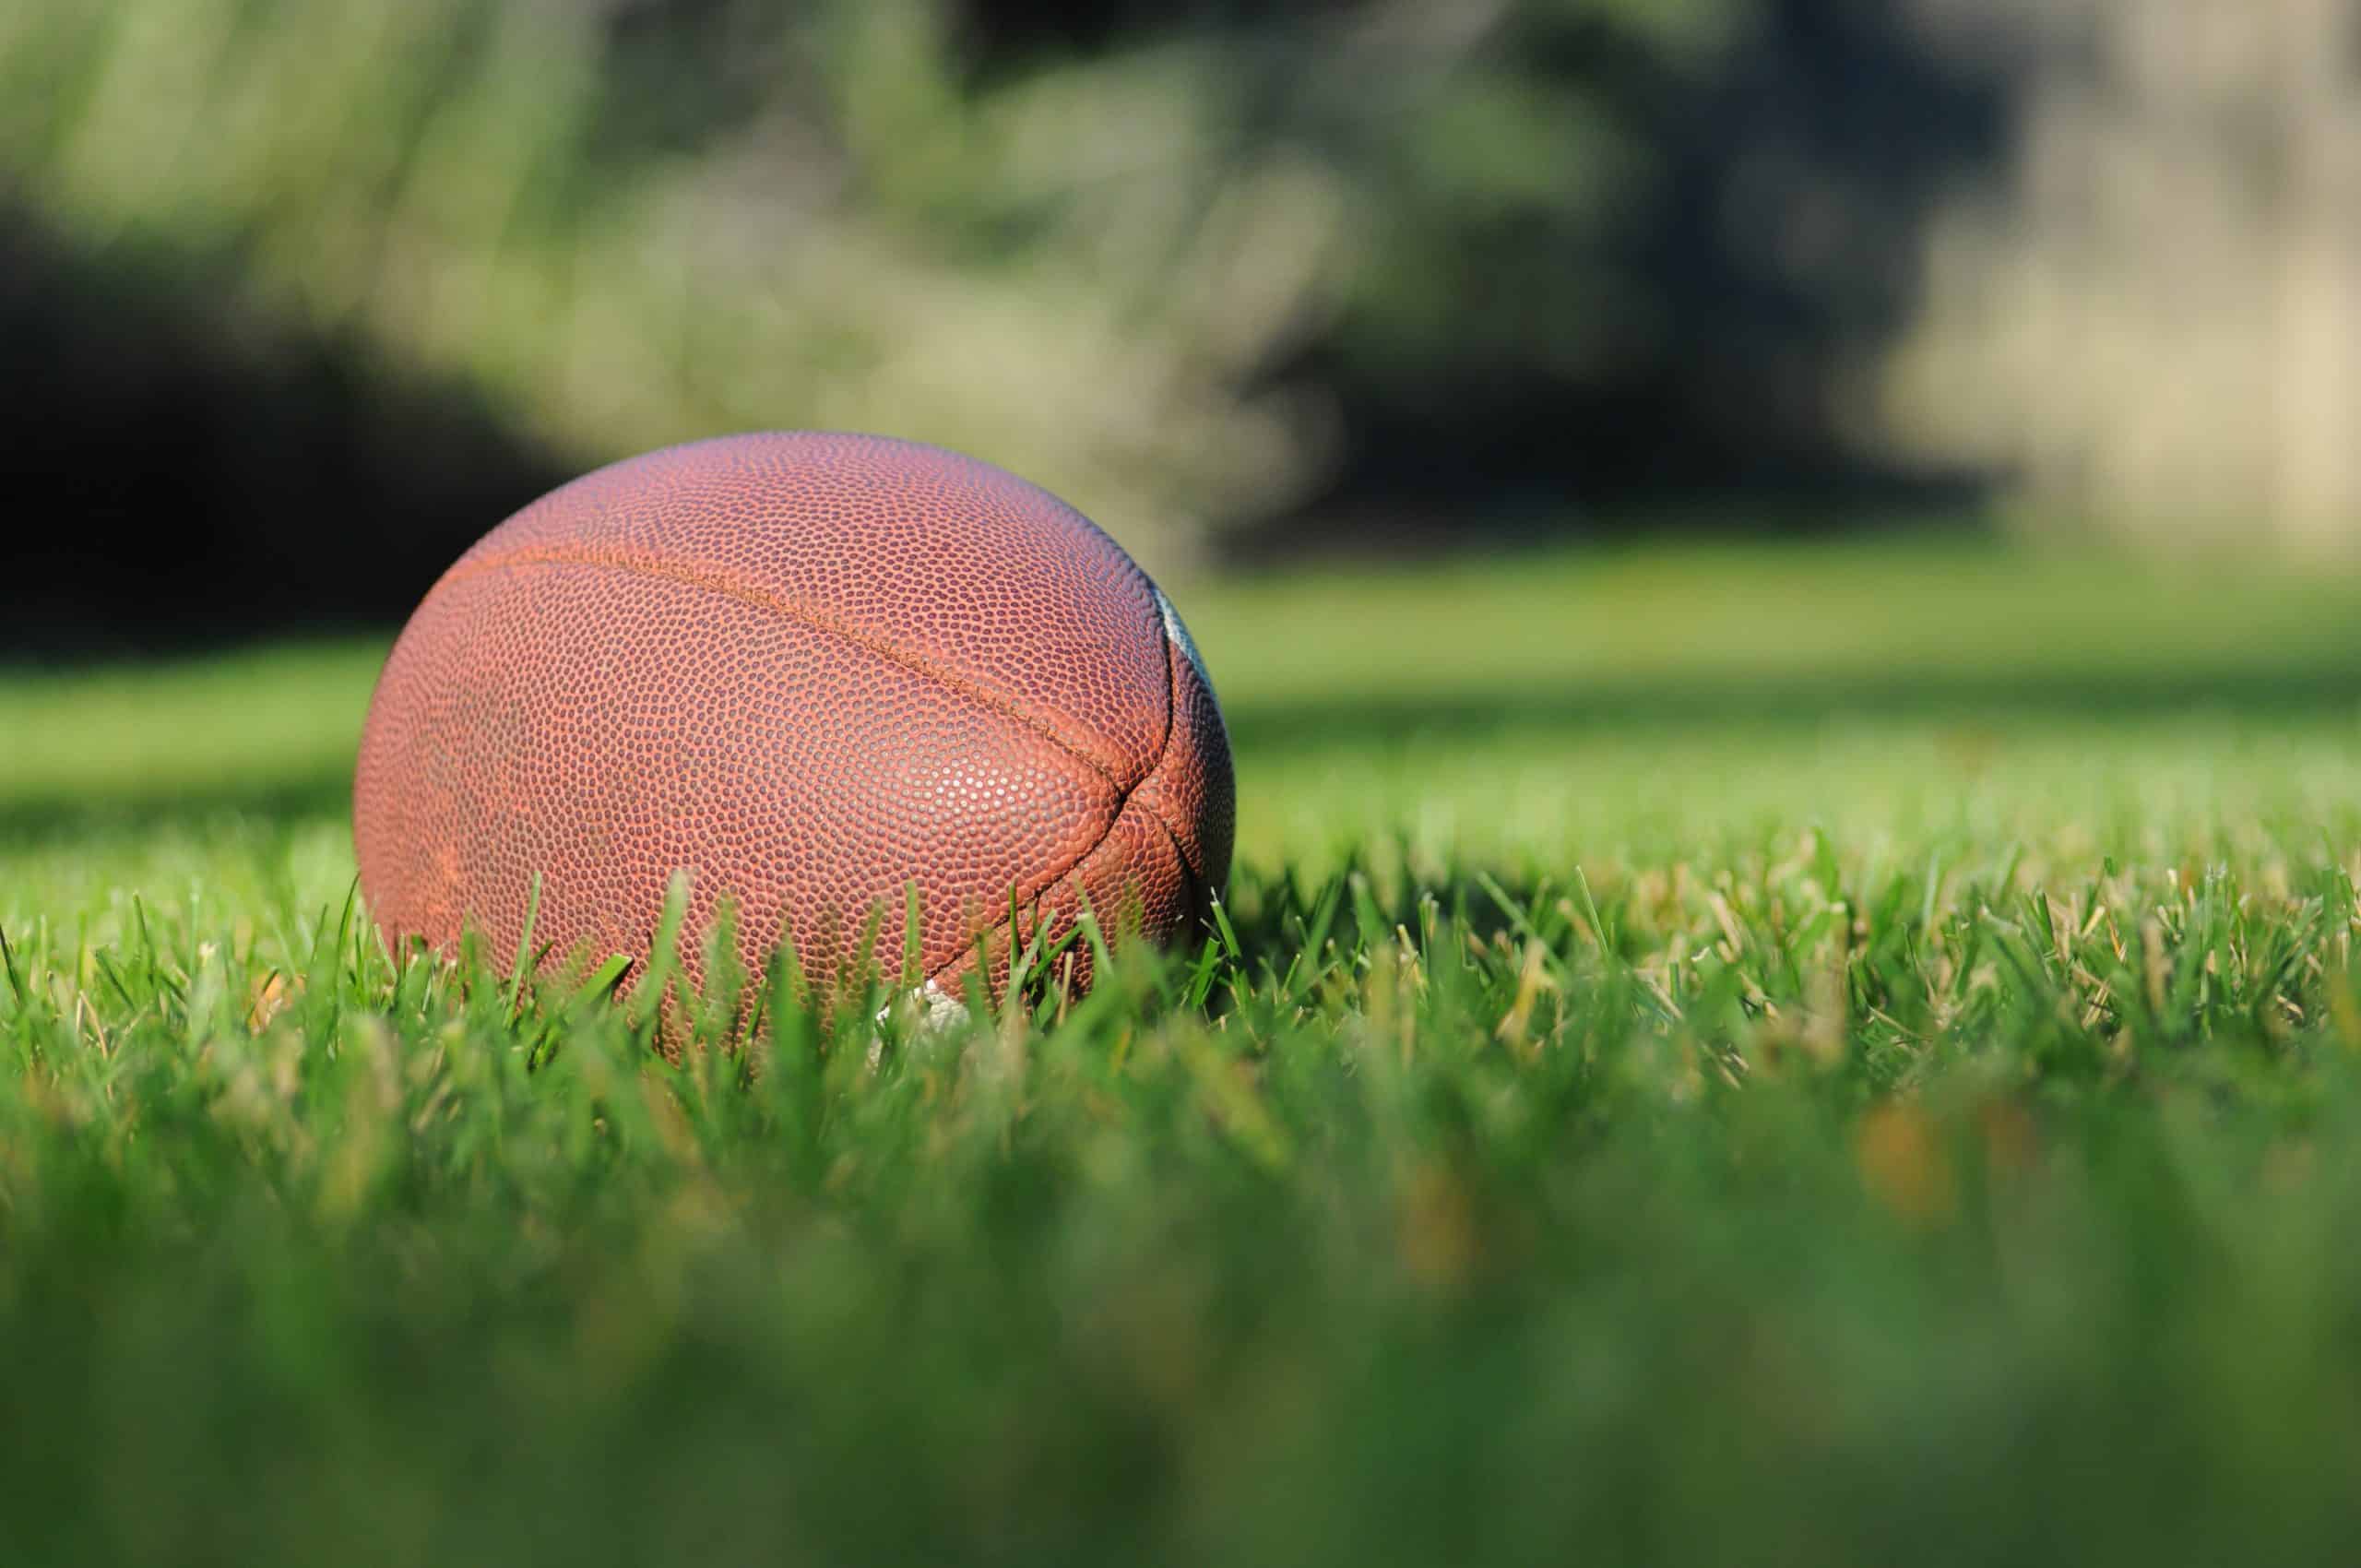 Image of a football sitting in the grass